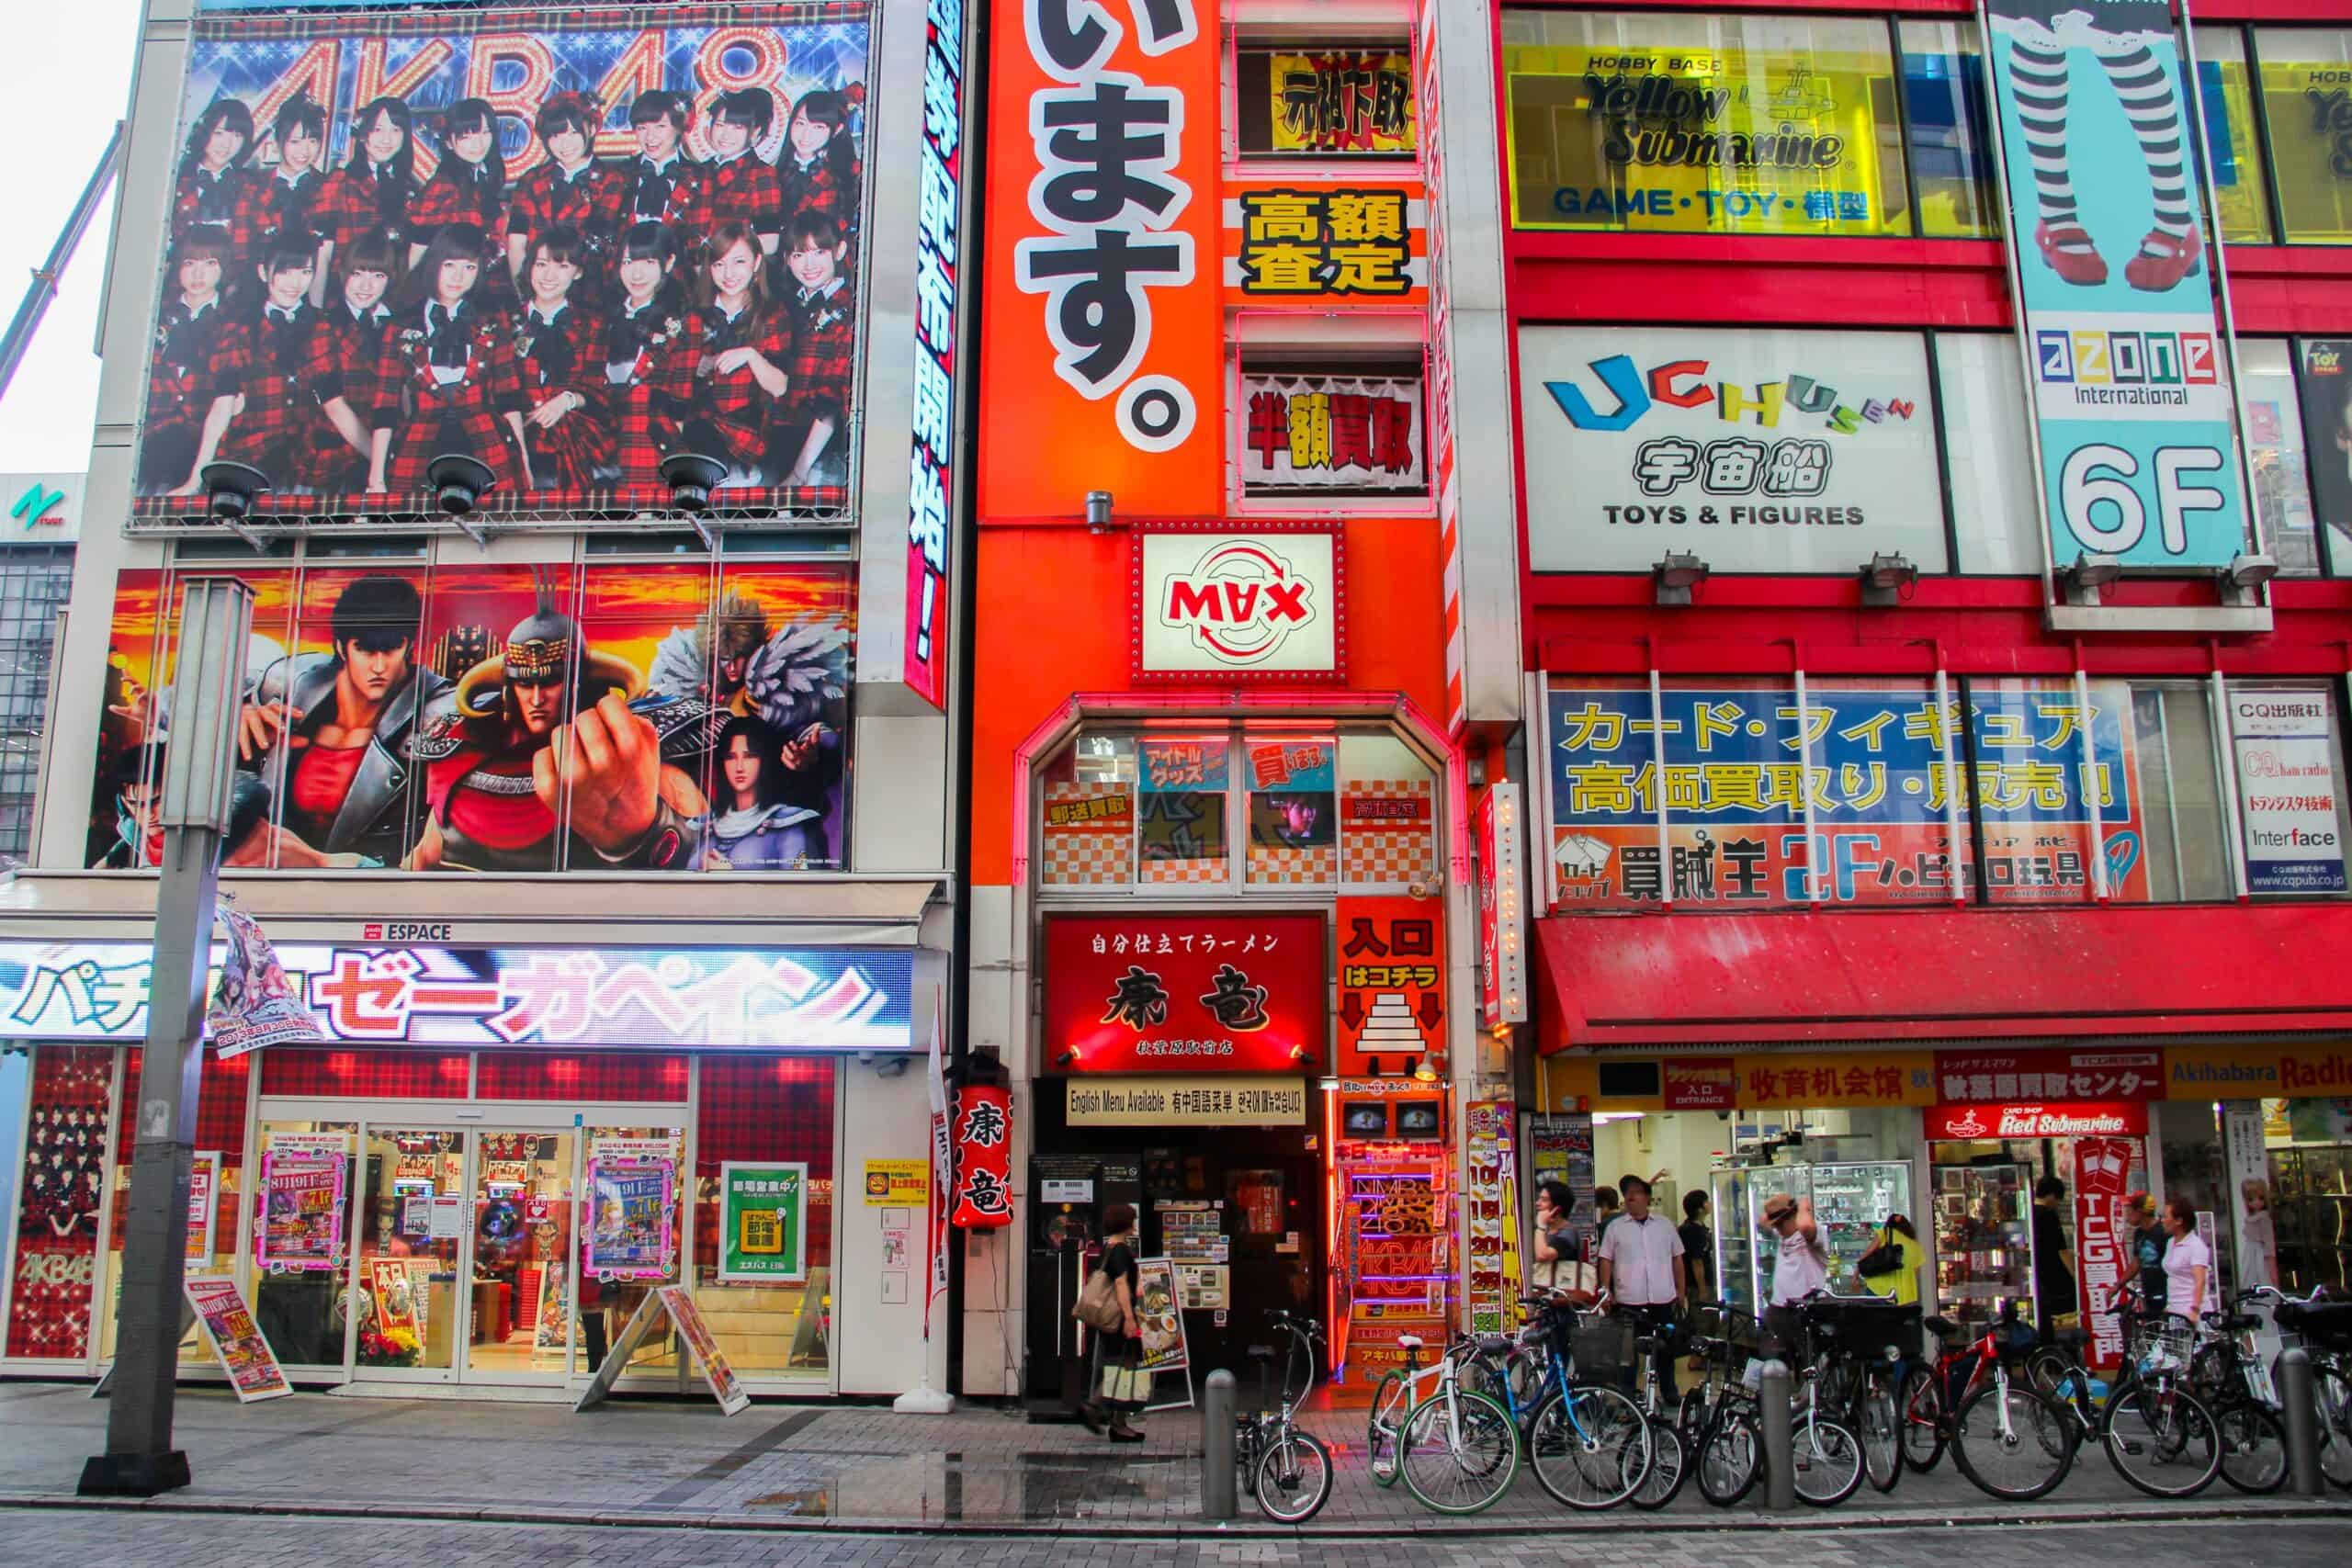 Large, bold advertising on a red building in Tokyo's Akihabara entertainment district. 